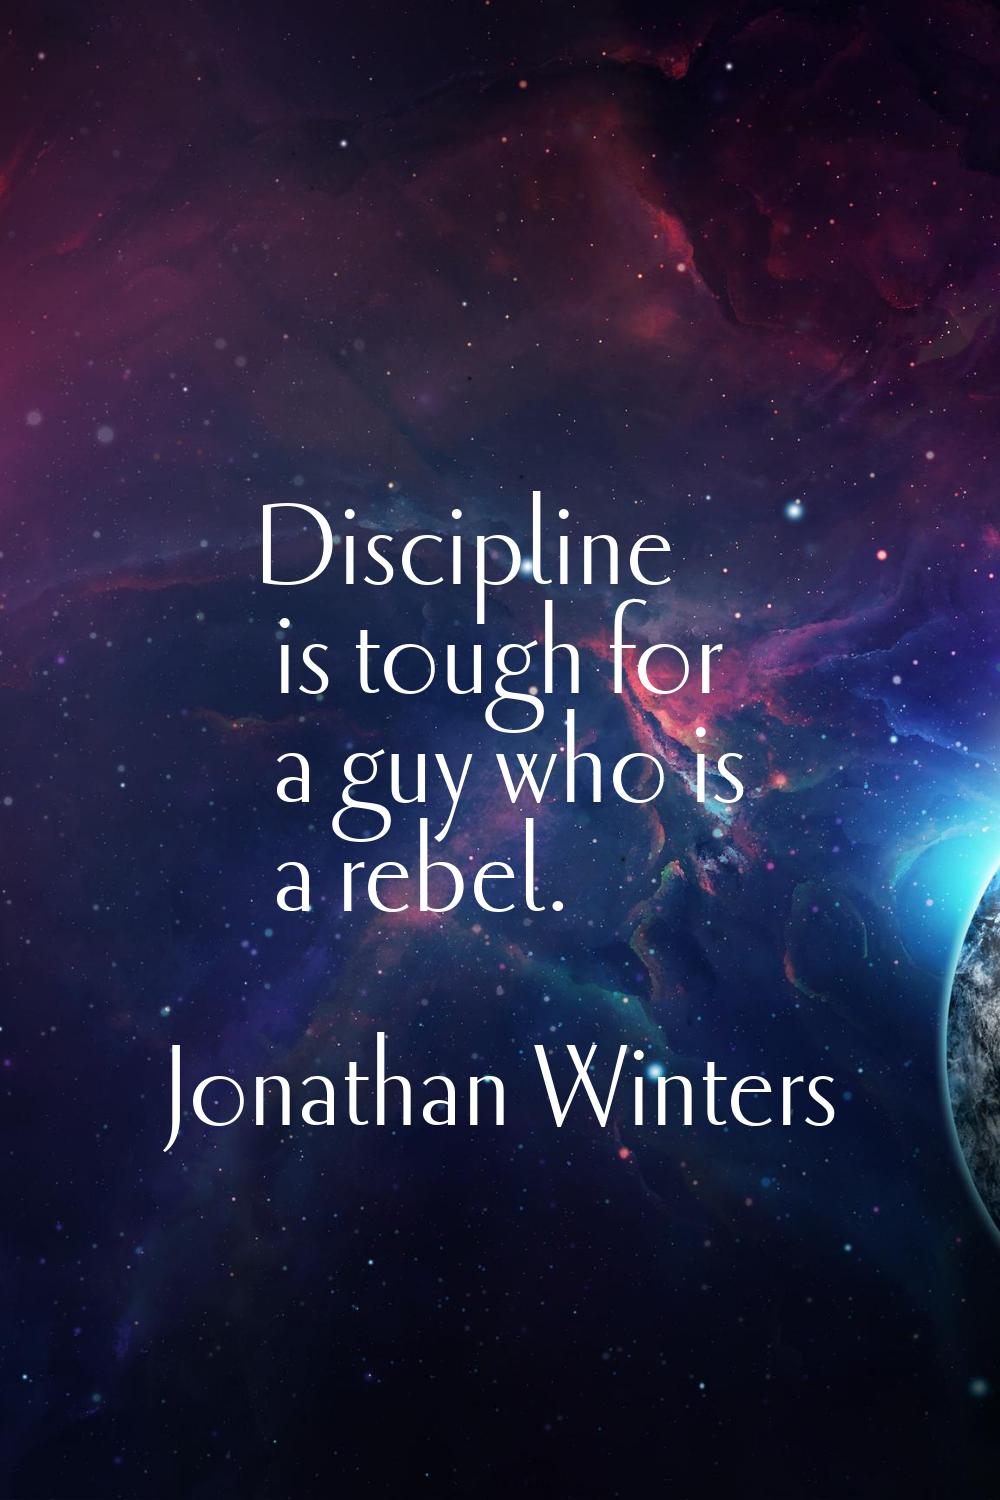 Discipline is tough for a guy who is a rebel.